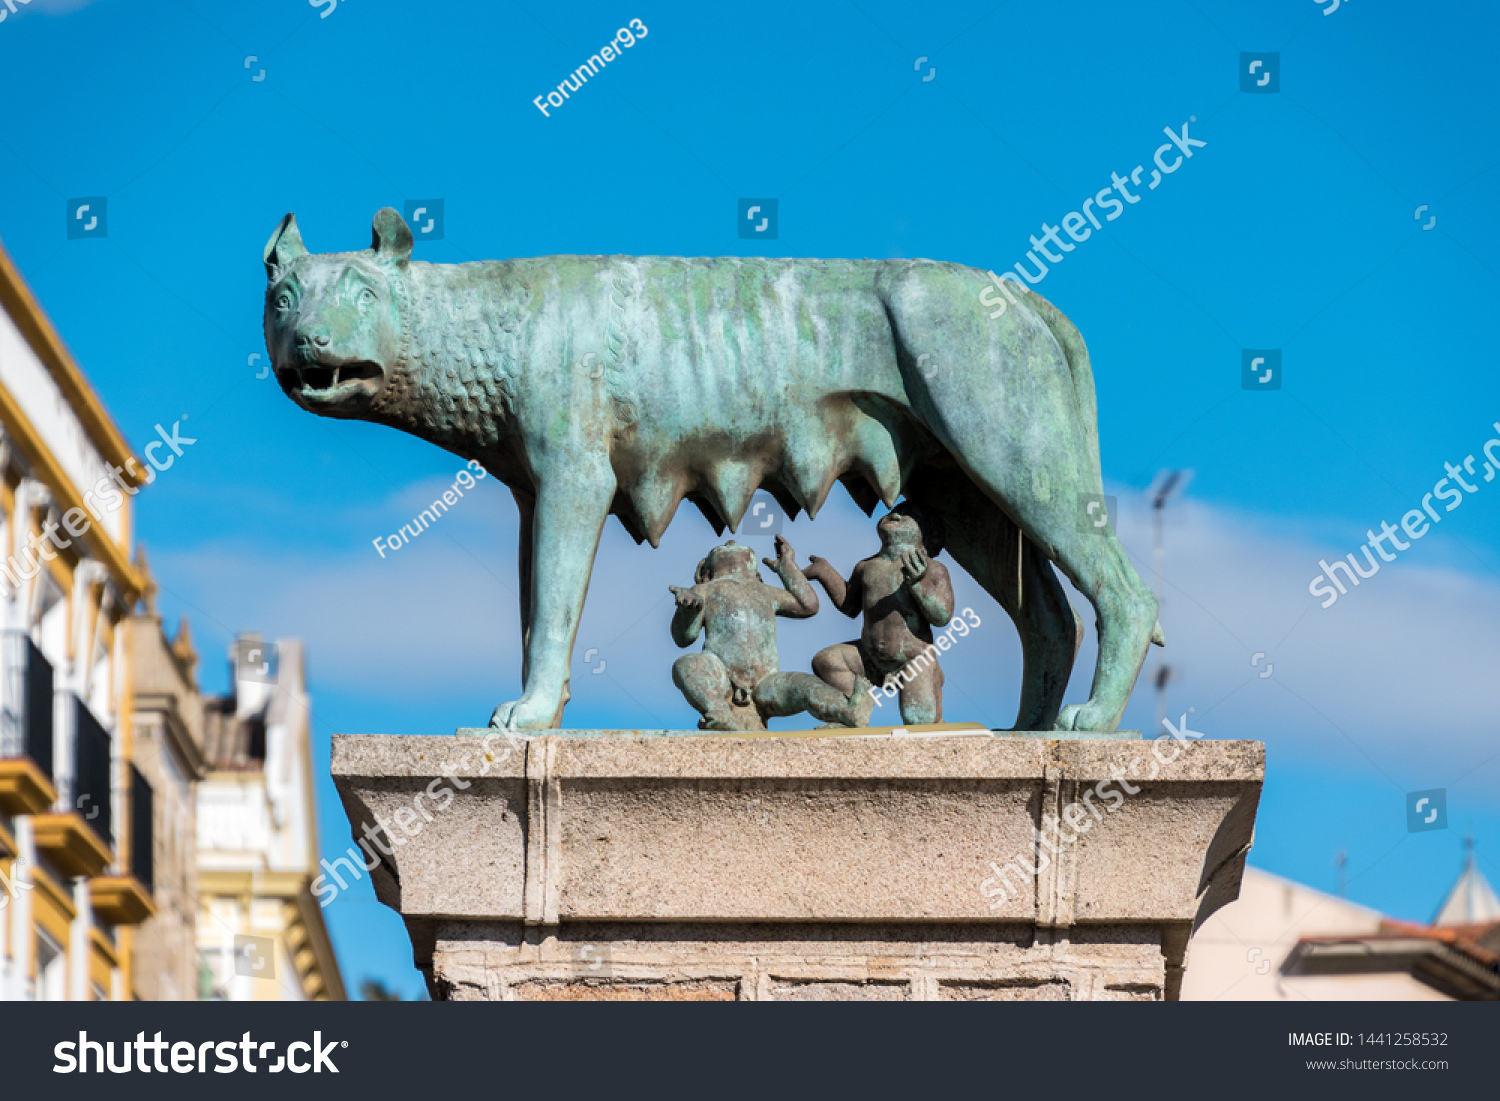 A statue of Romulus and Remus from Roman mythology in Merida, Spain #1441258532